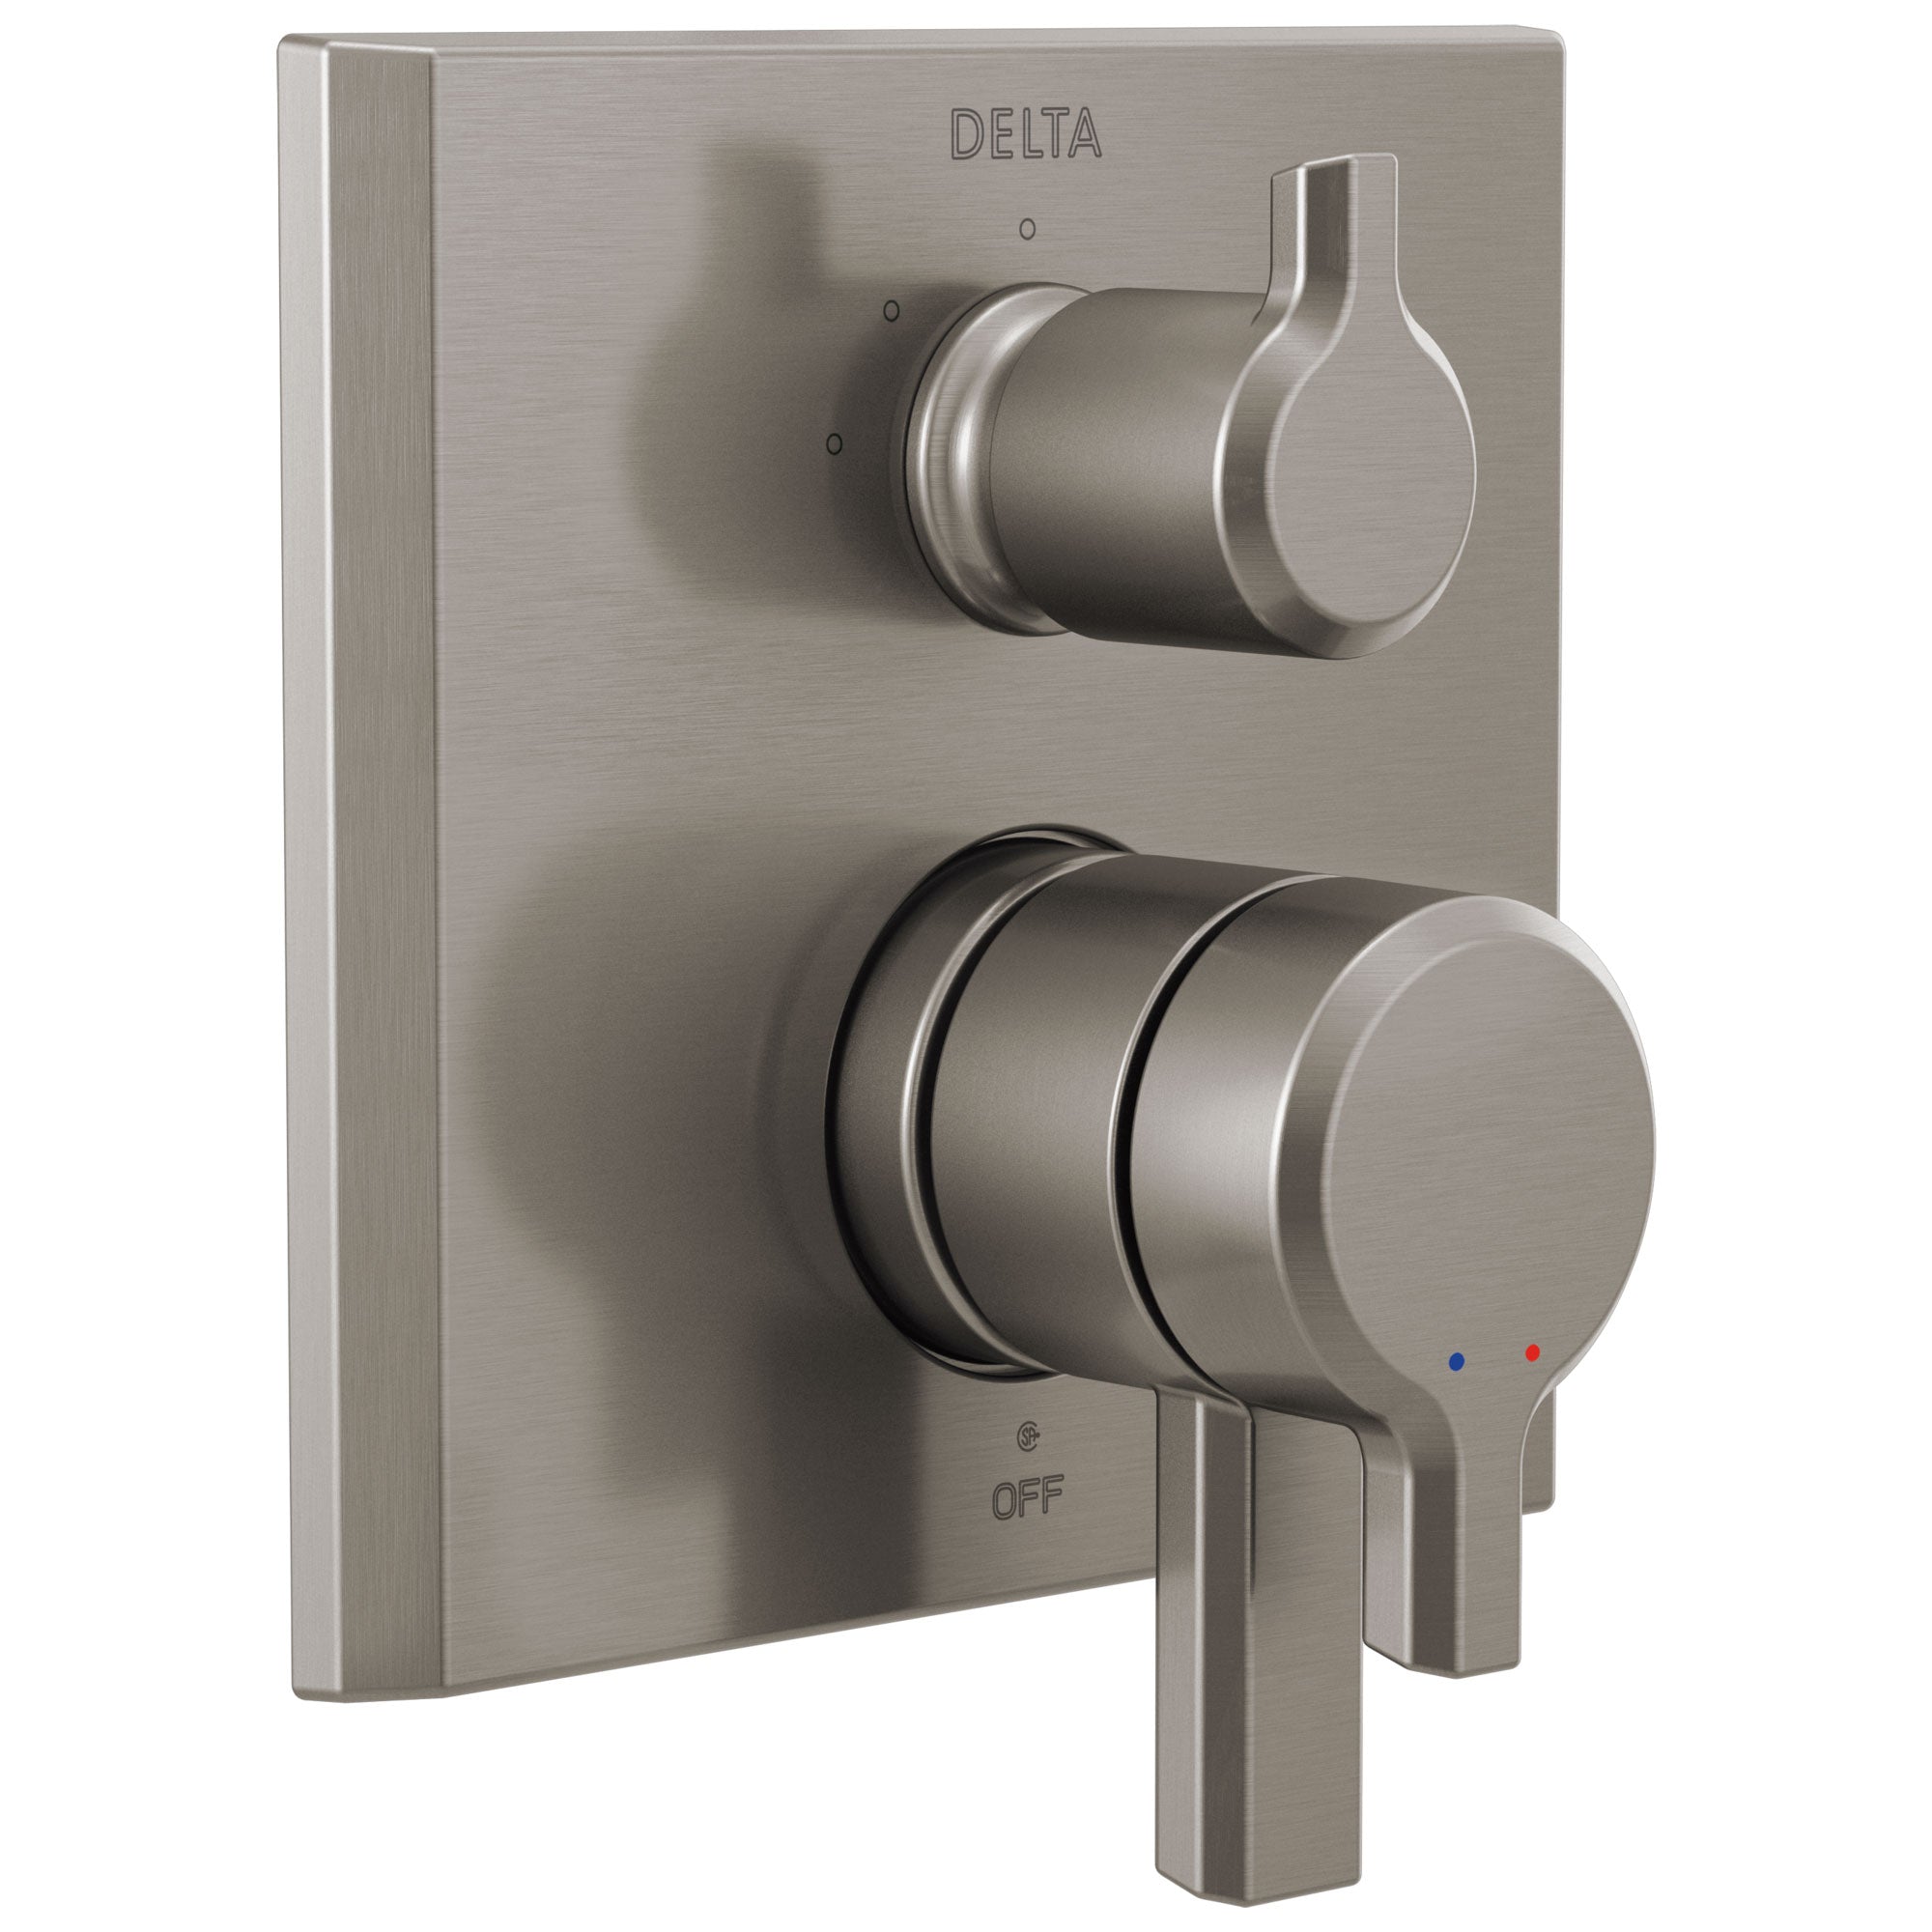 Delta Pivotal Stainless Steel Finish 17 Series Shower Control Trim Kit with 3-Function Integrated Diverter (Requires Valve) DT27899SS